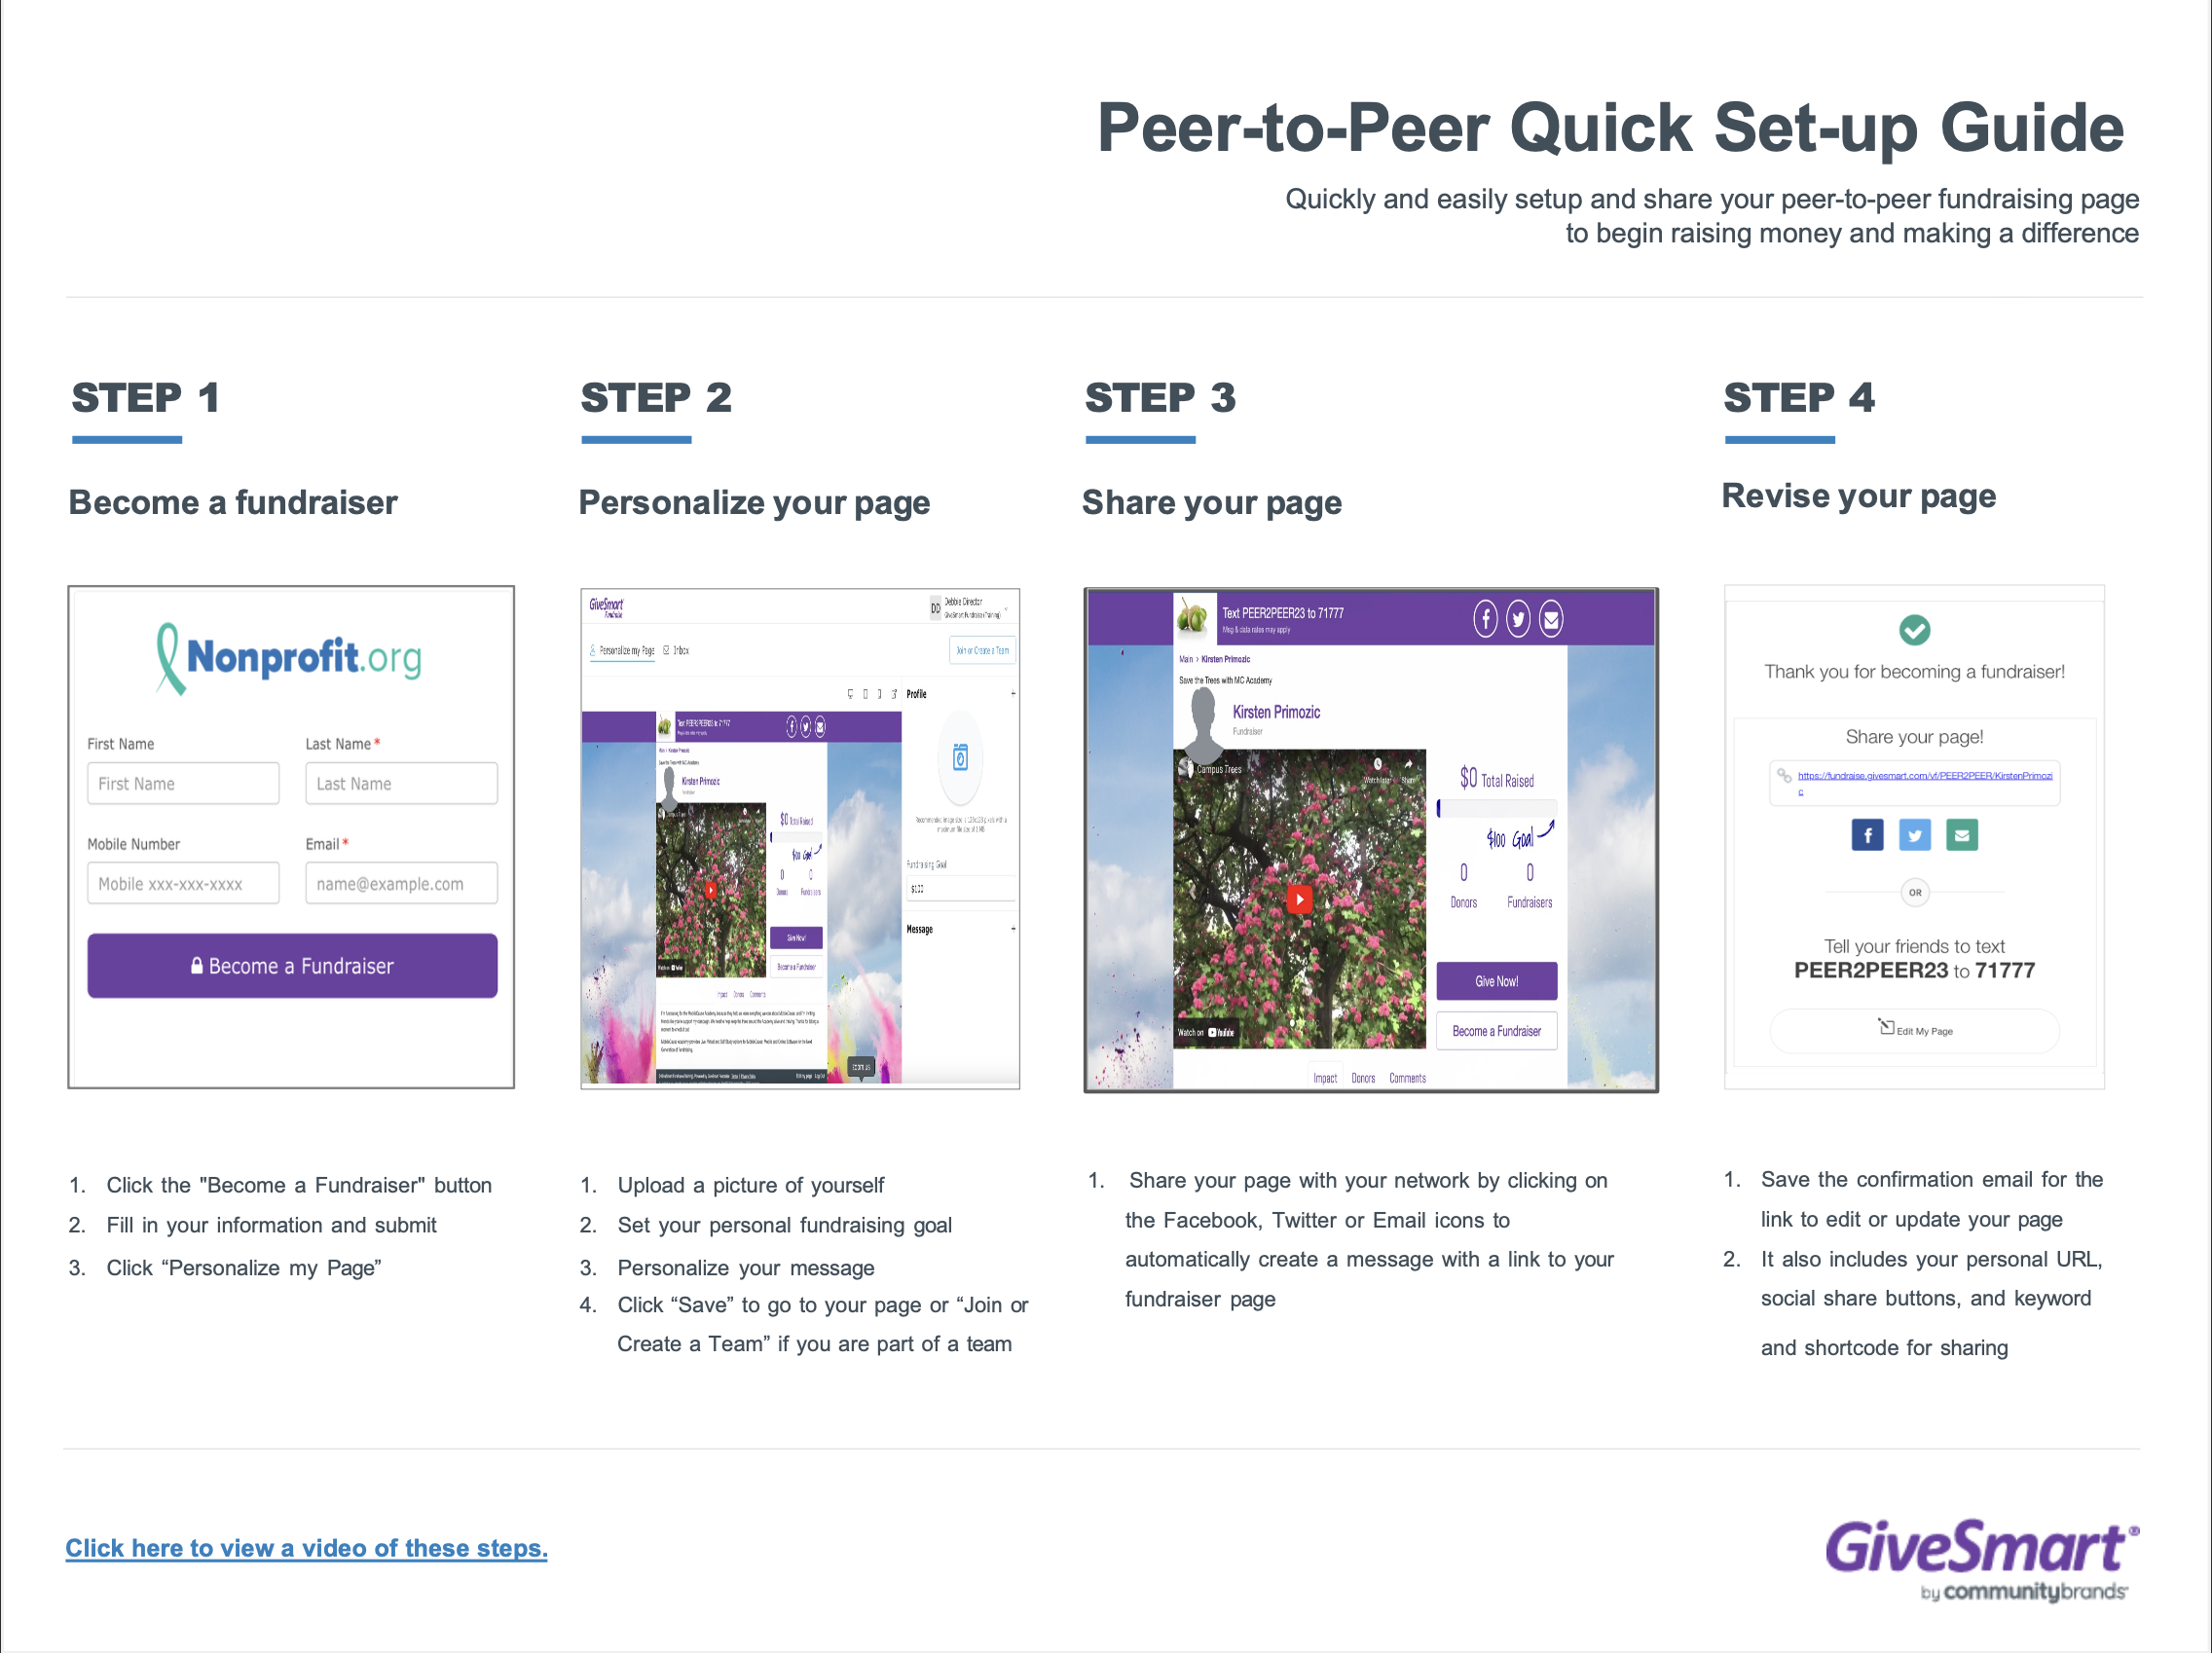 GiveSmart Fundraise Peer to Peer Set-Up Guide